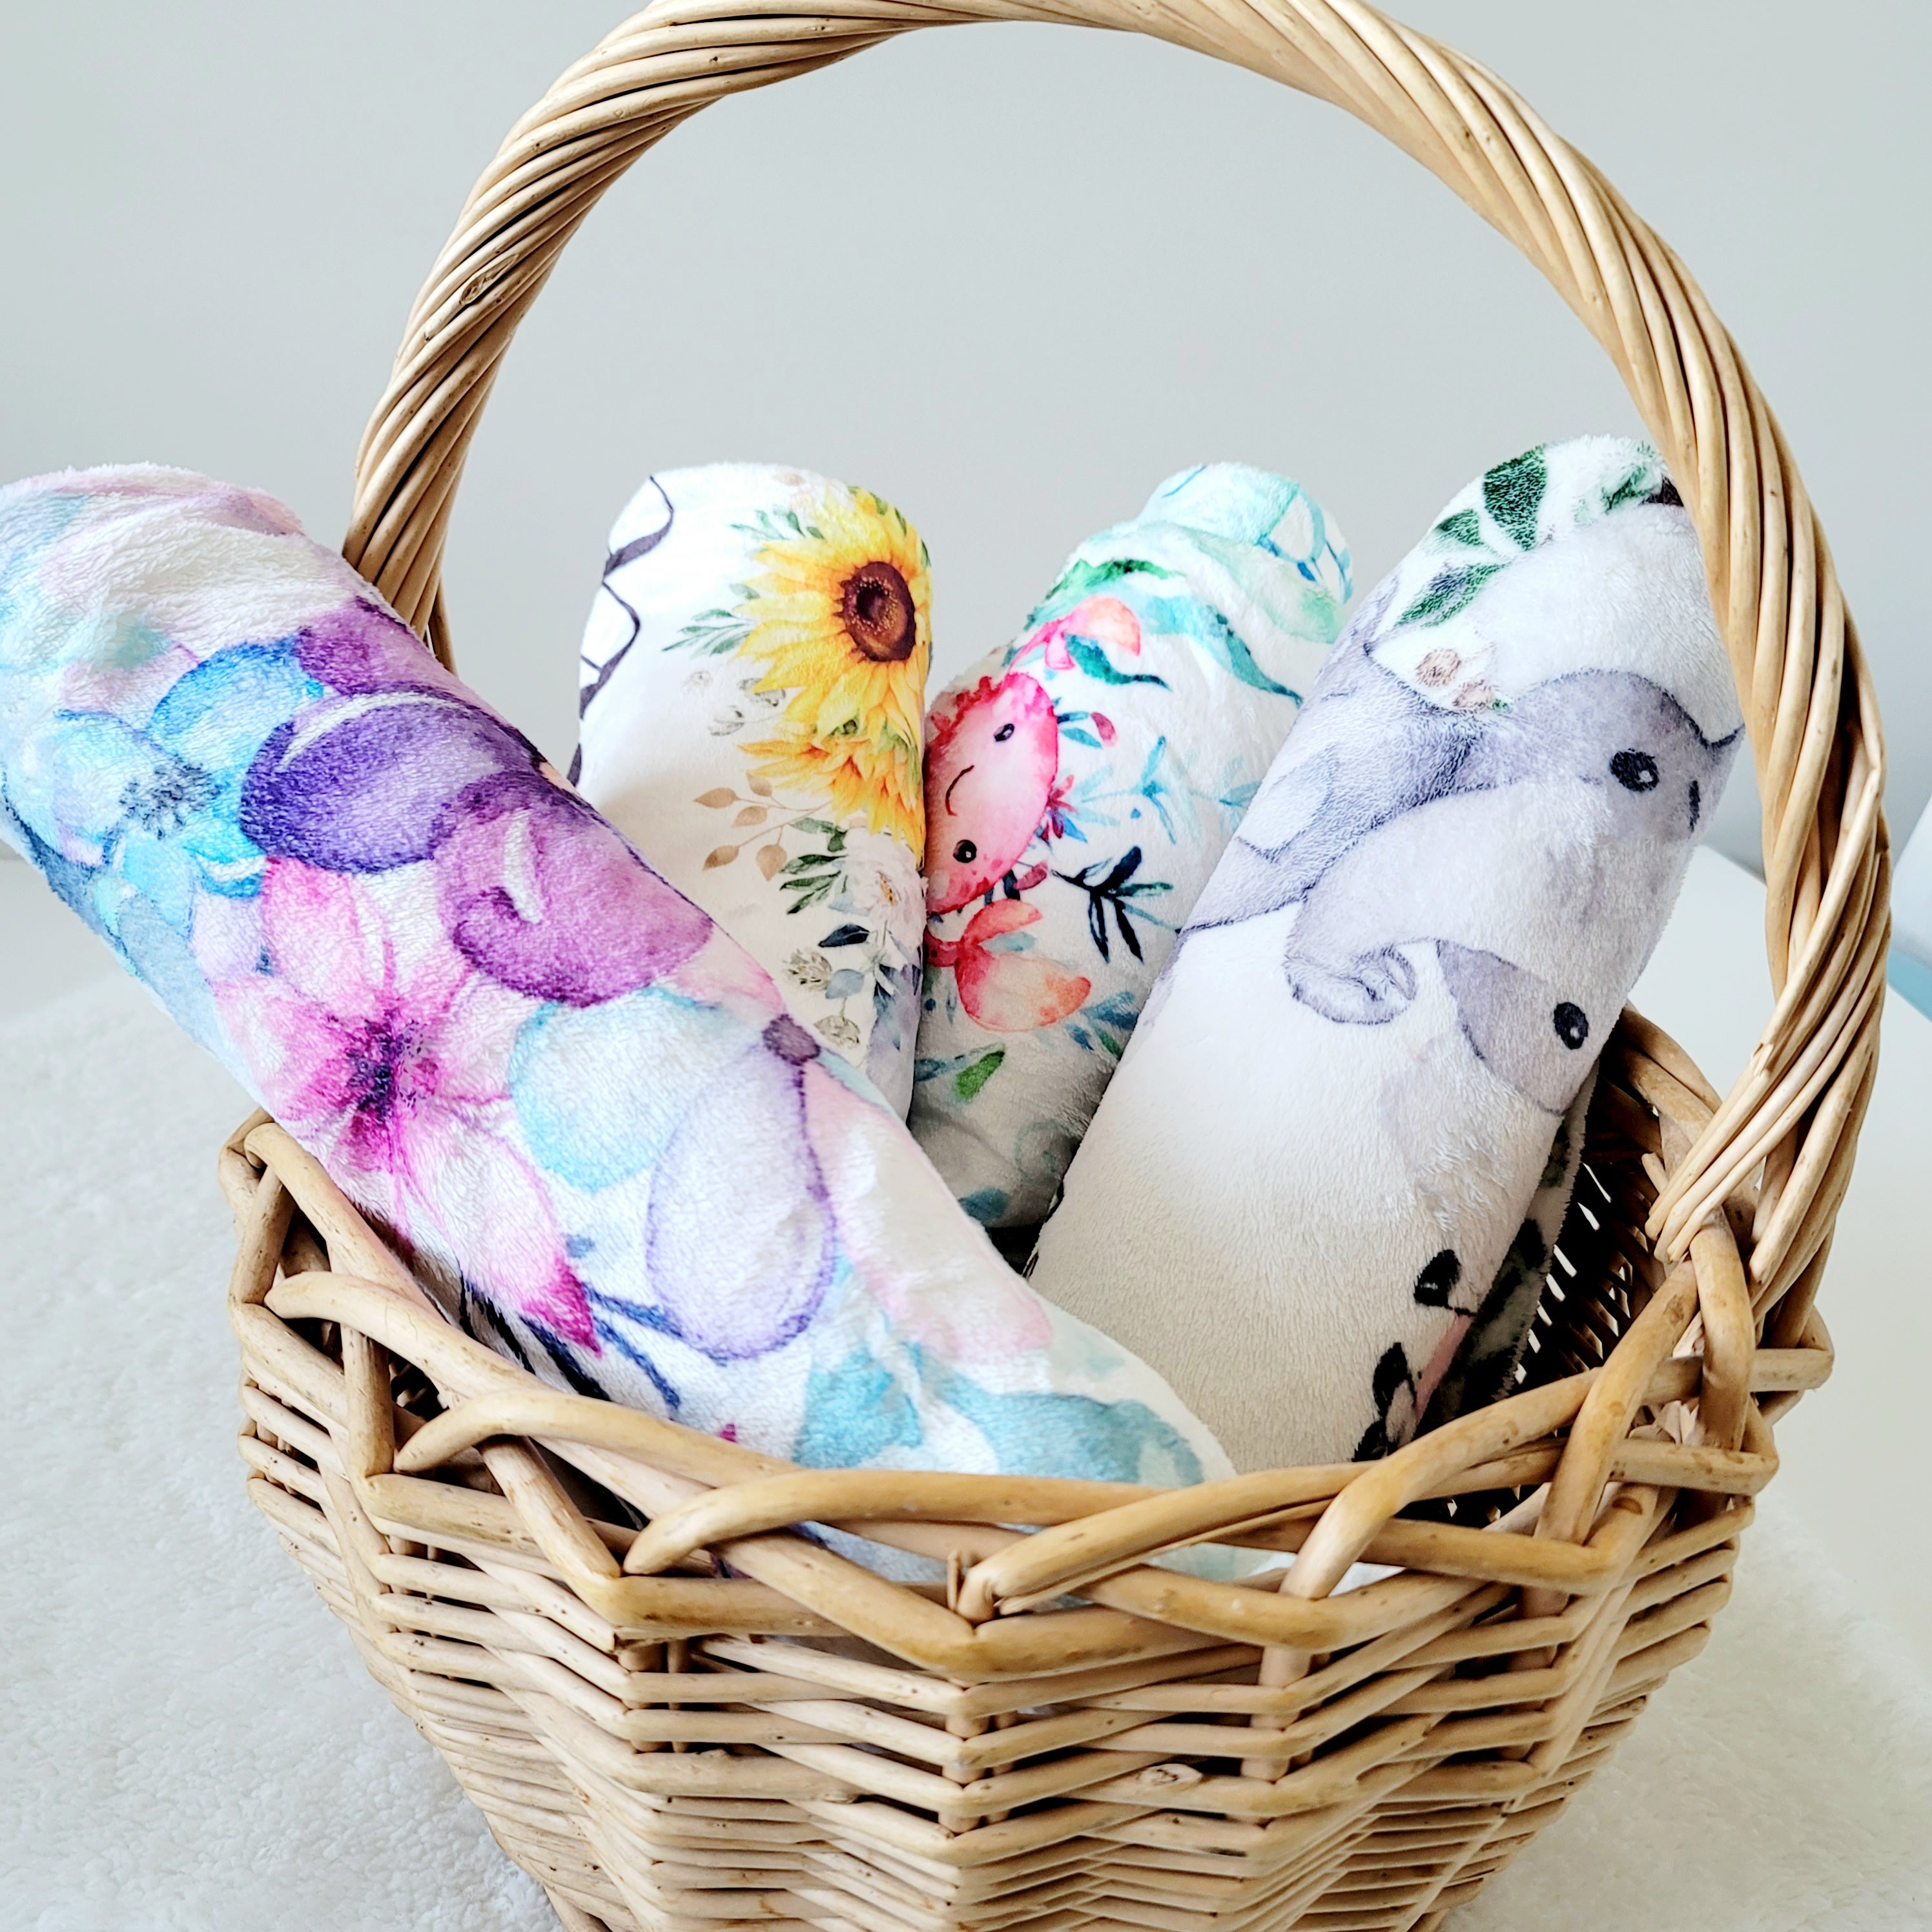 A group of four baby fleece blankets with cute designs made into rolls inside a wooden basket.